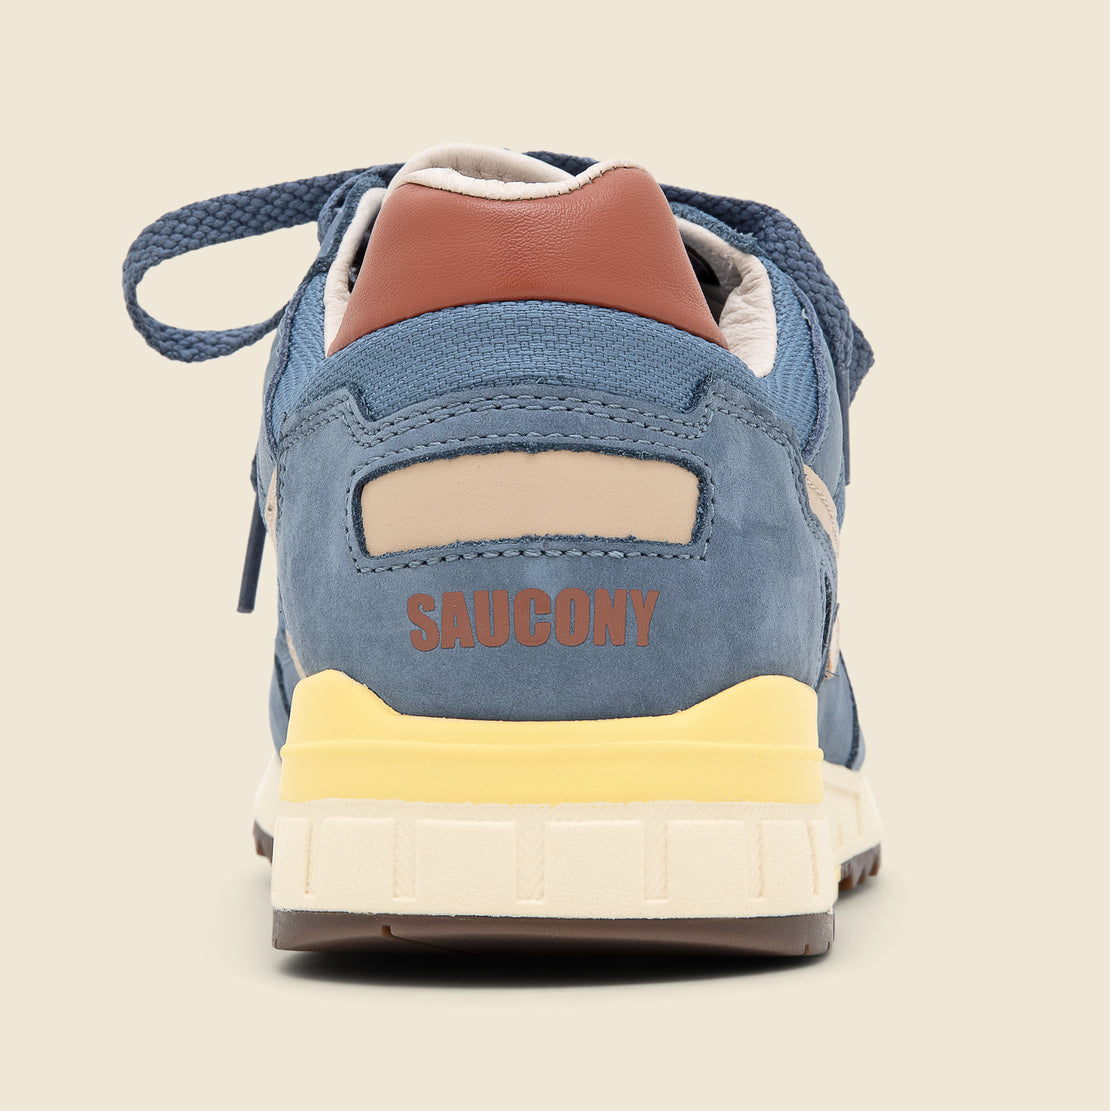 Shadow 5000 Sneaker - Denim/Tan - Saucony - STAG Provisions - Shoes - Athletic